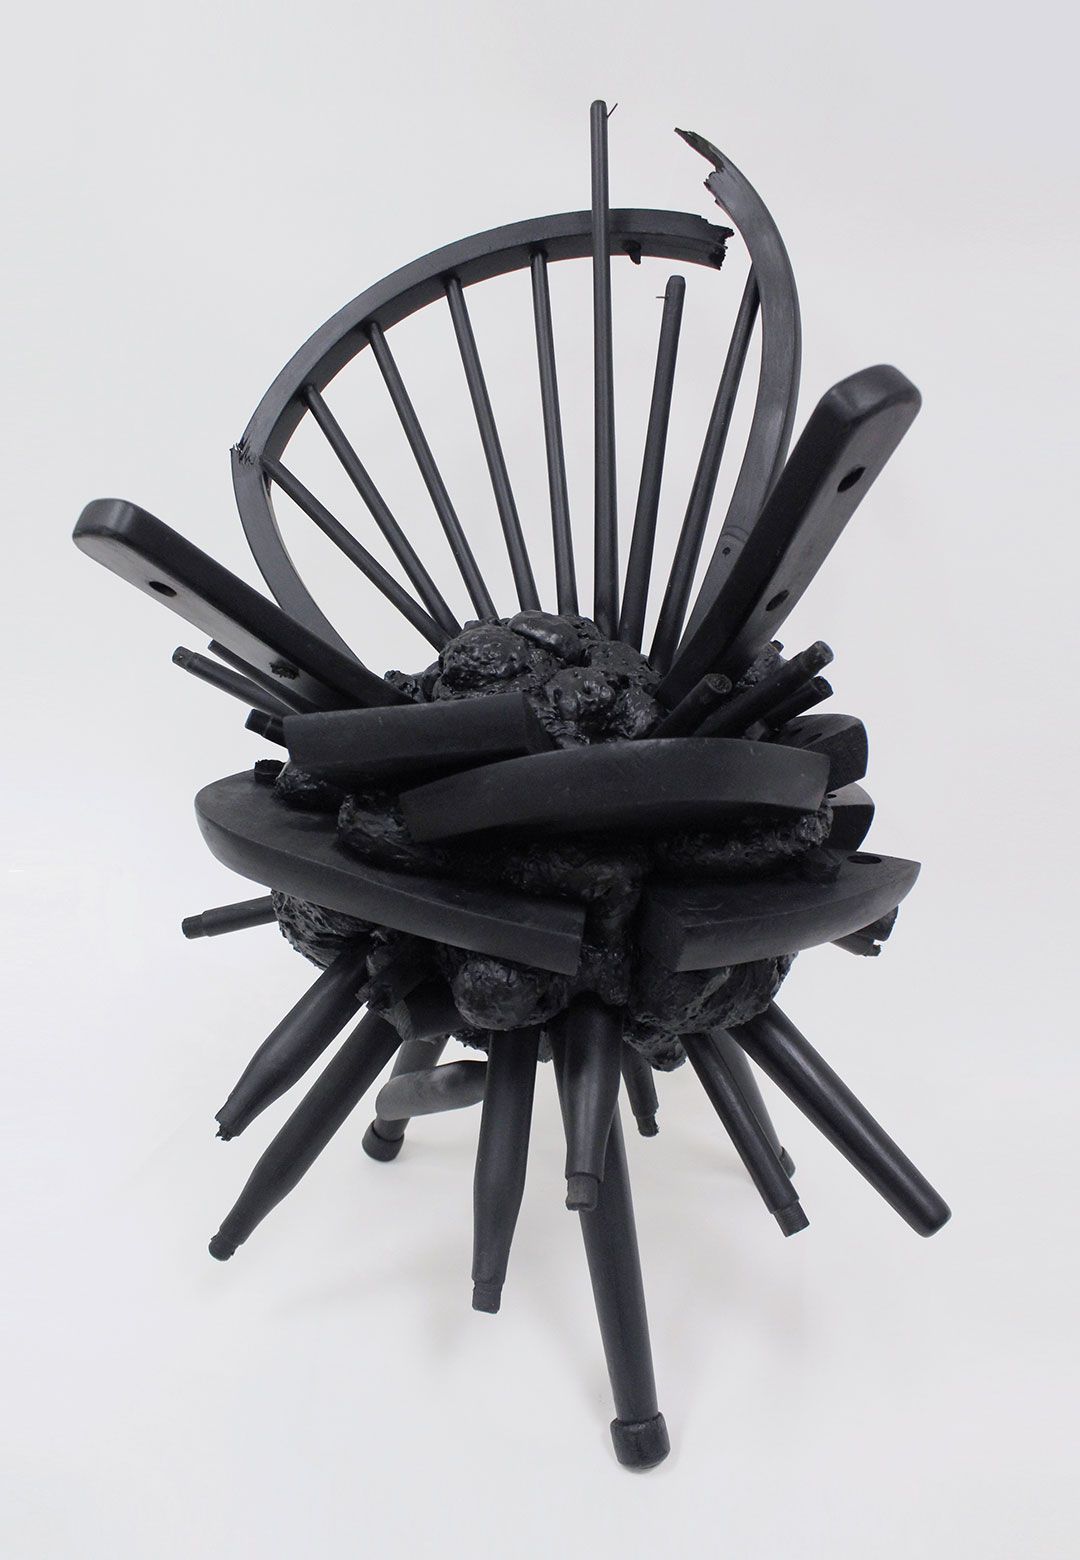 Joyce Lin on dissecting, dismantling, and playing with conventions of chair design